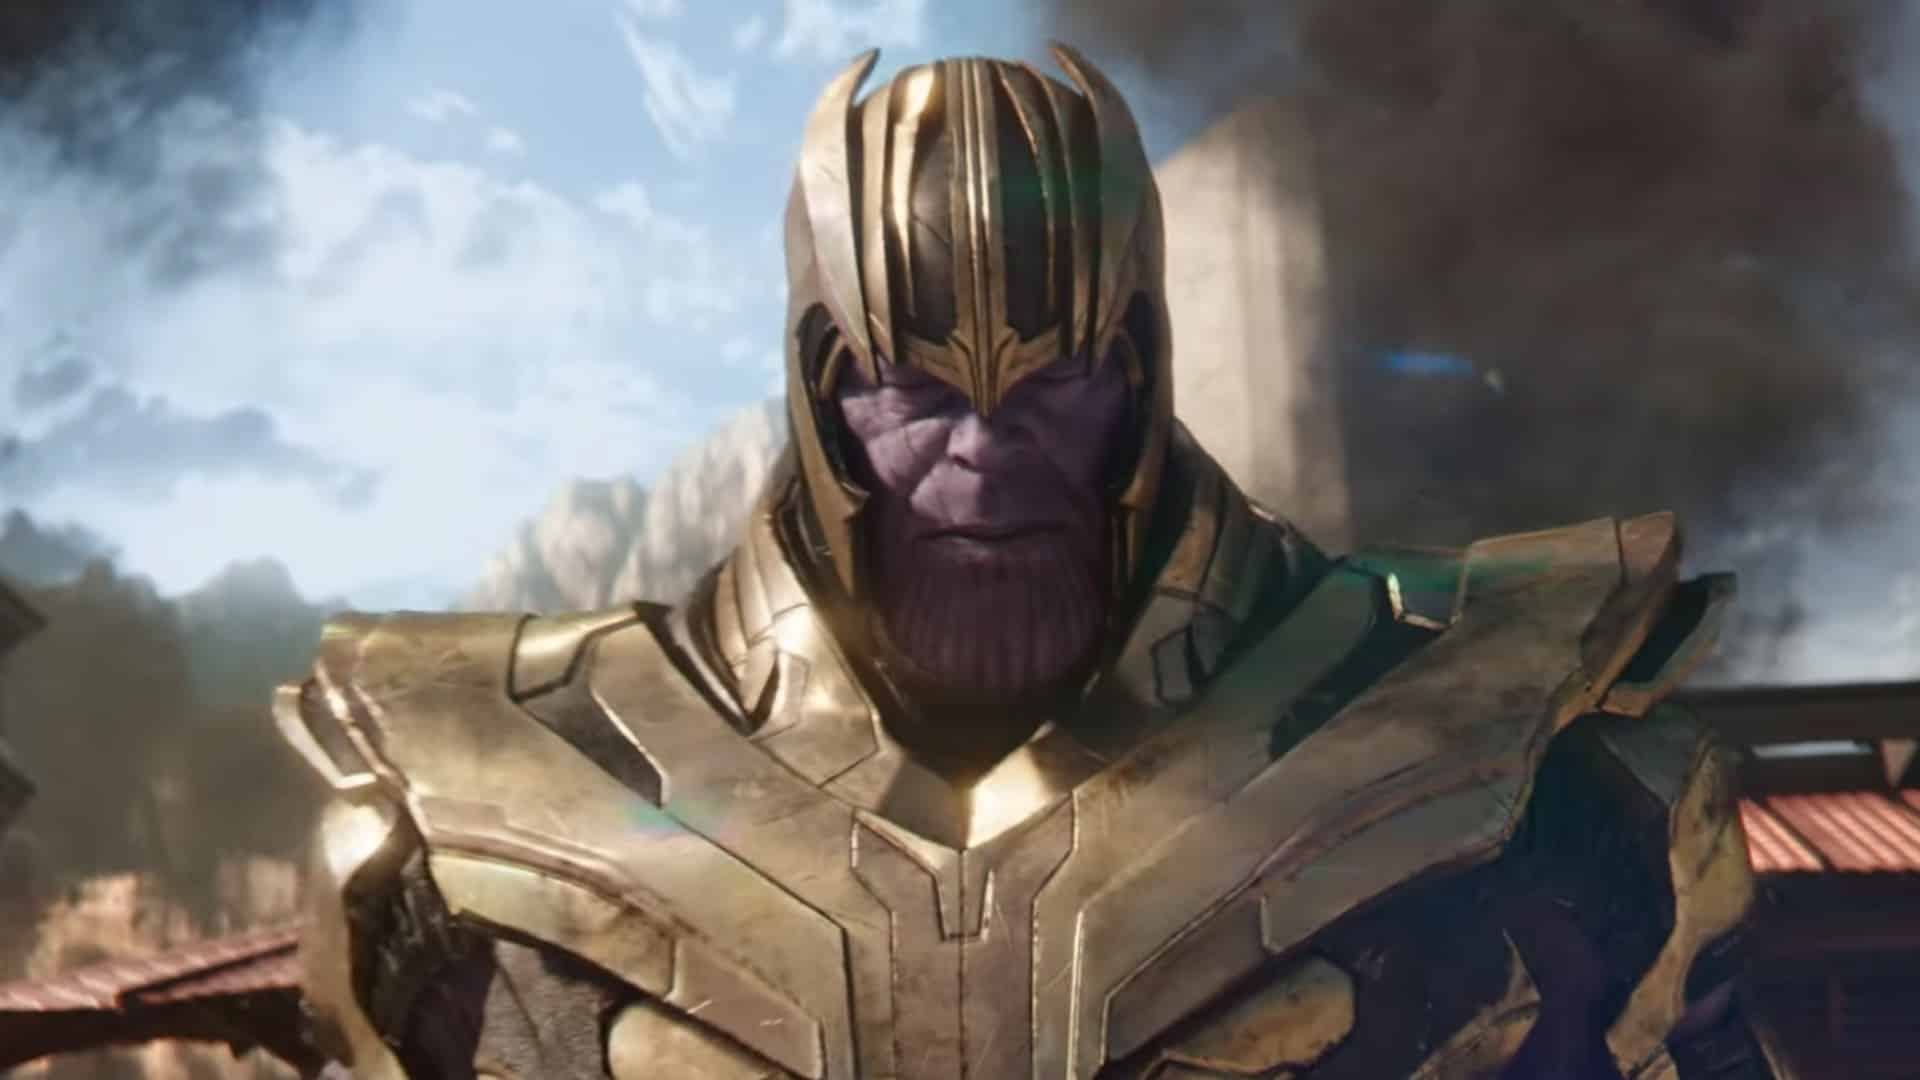 MTV Movie and TV Awards 2019: Thanos vince come “Best Villain”